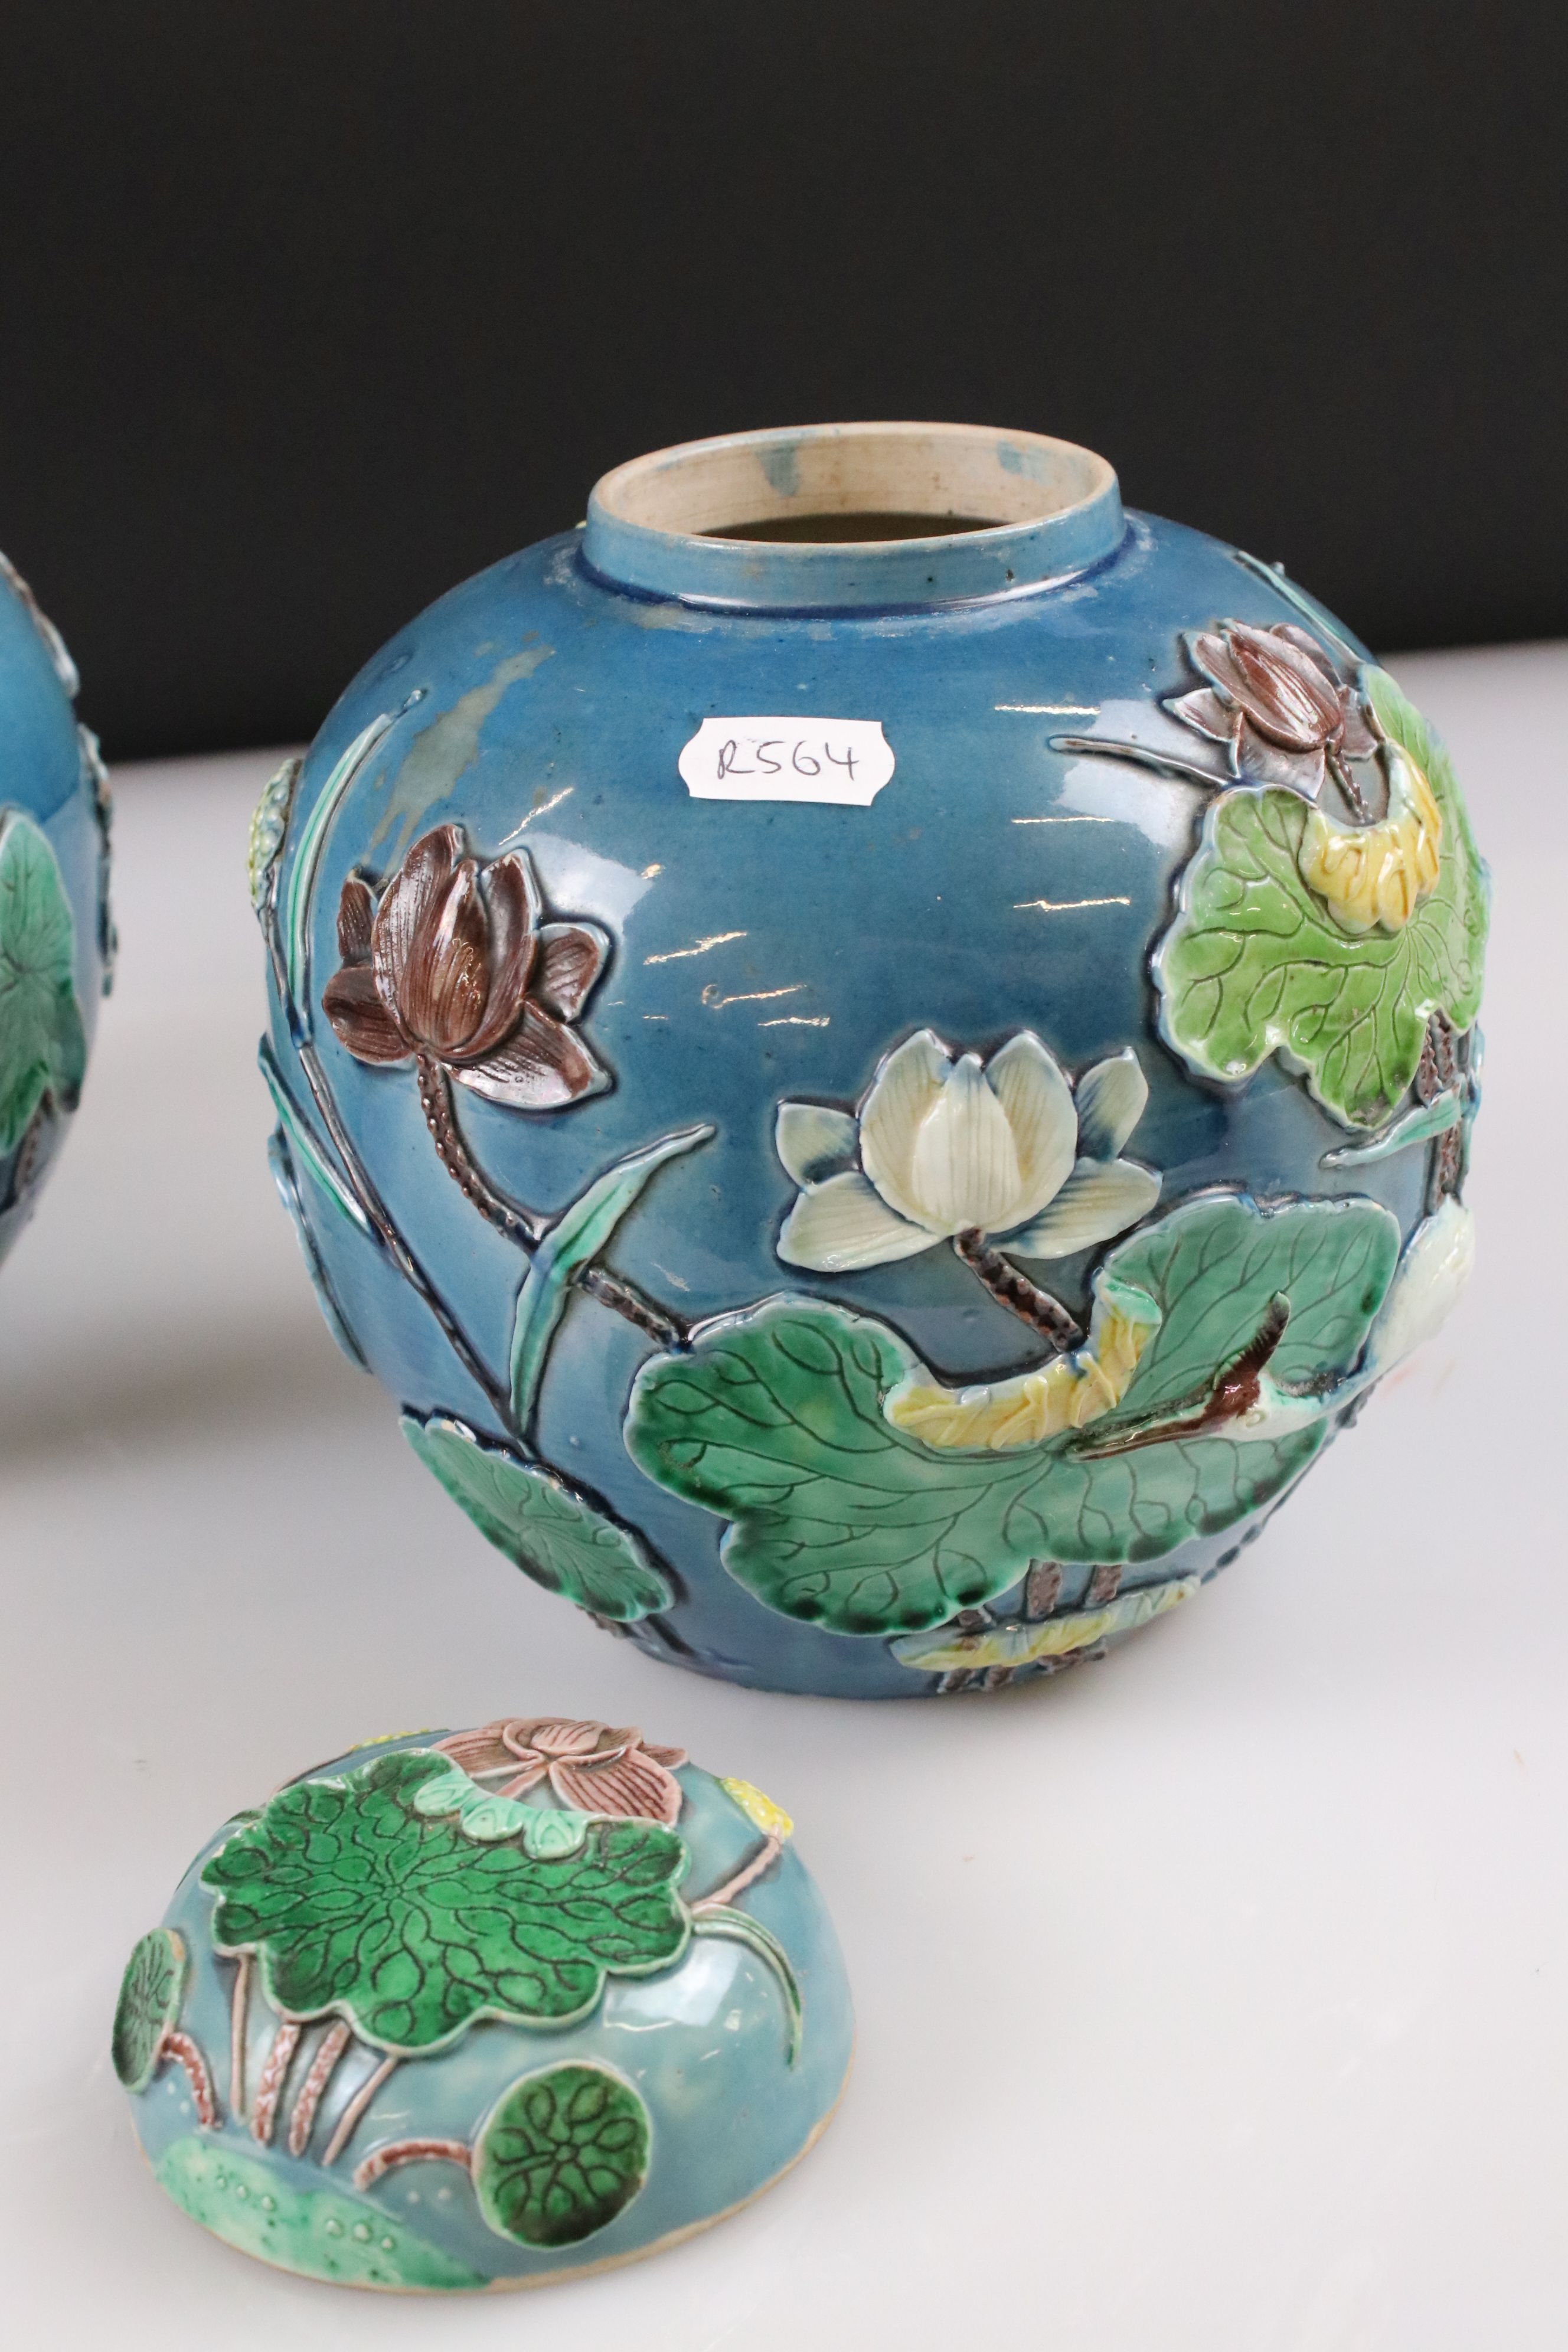 Pair of Chinese Porcelain ' Wang Bing Rong ' Ginger Jars and Covers with moulded relief decoration - Image 2 of 8